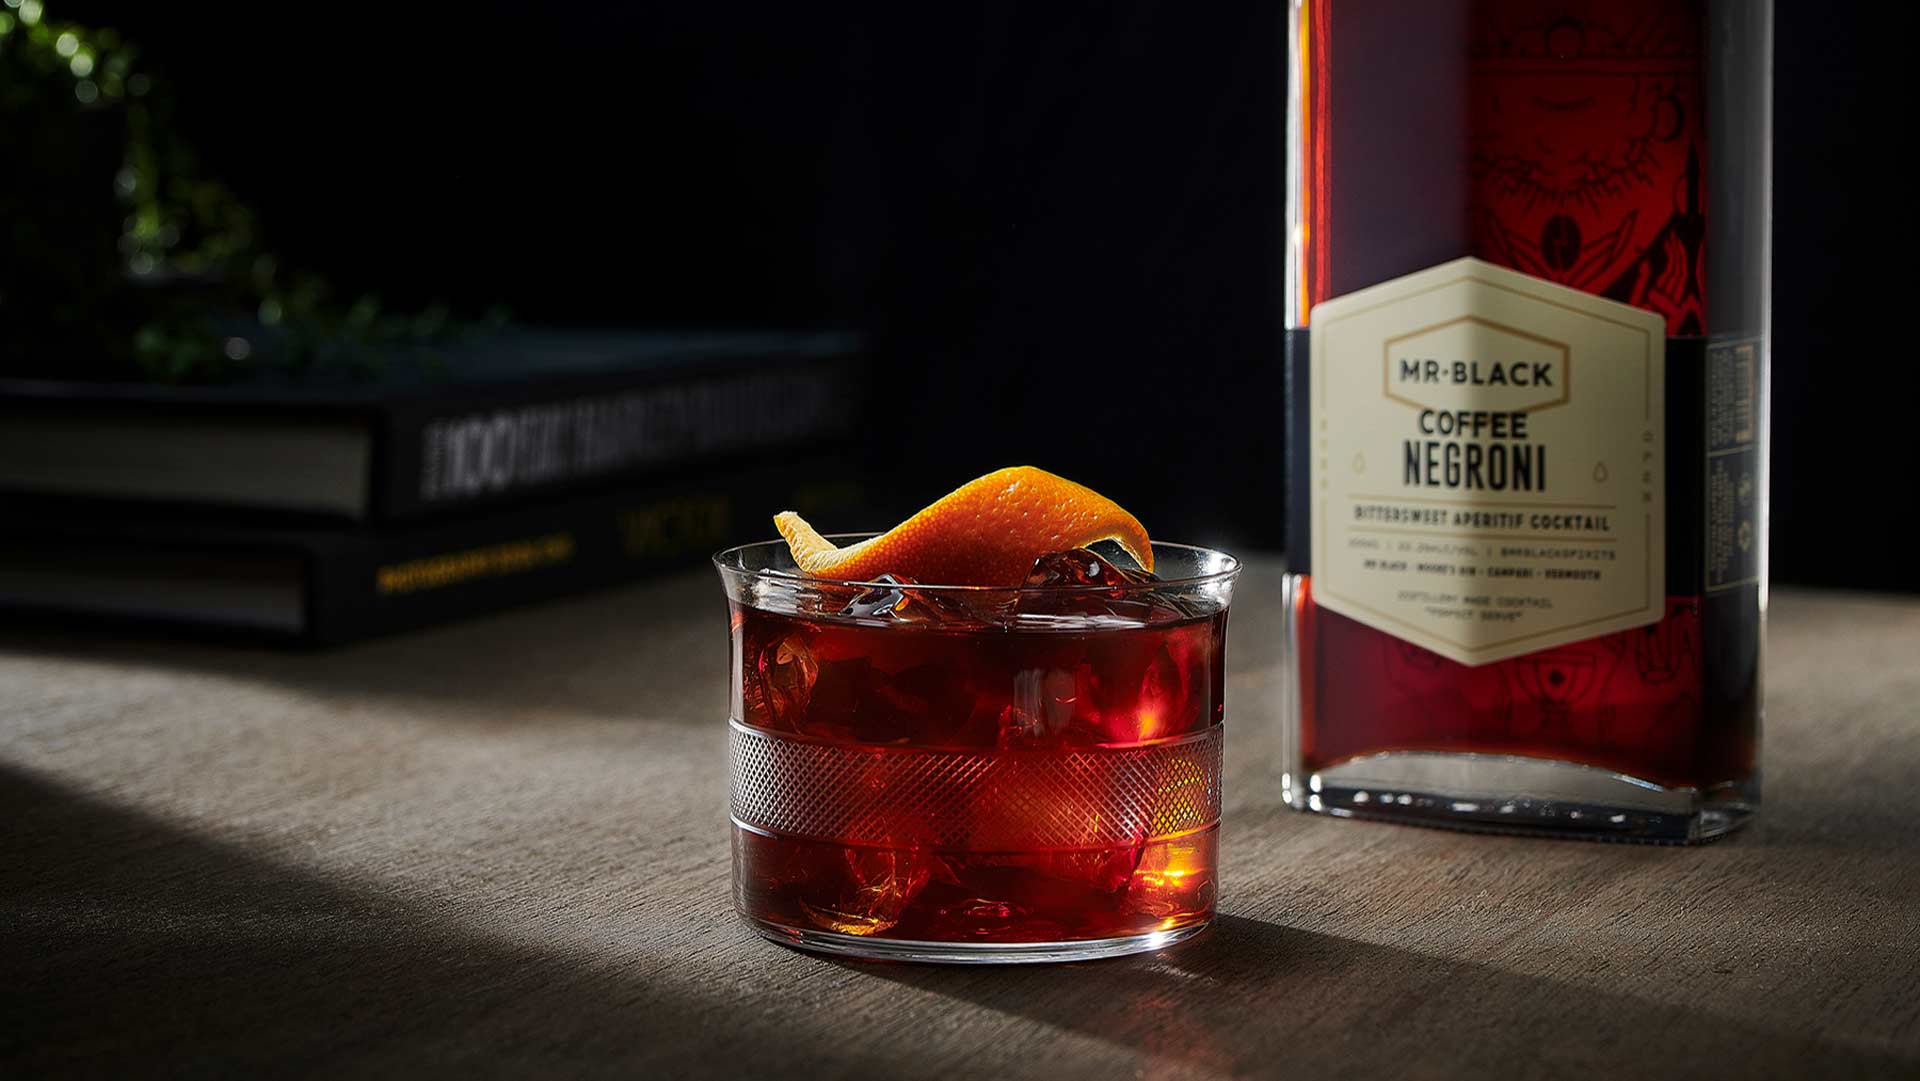 Mr Black Has Just Released a Bottled Coffee Negroni for When You Want Both Caffeine and Booze